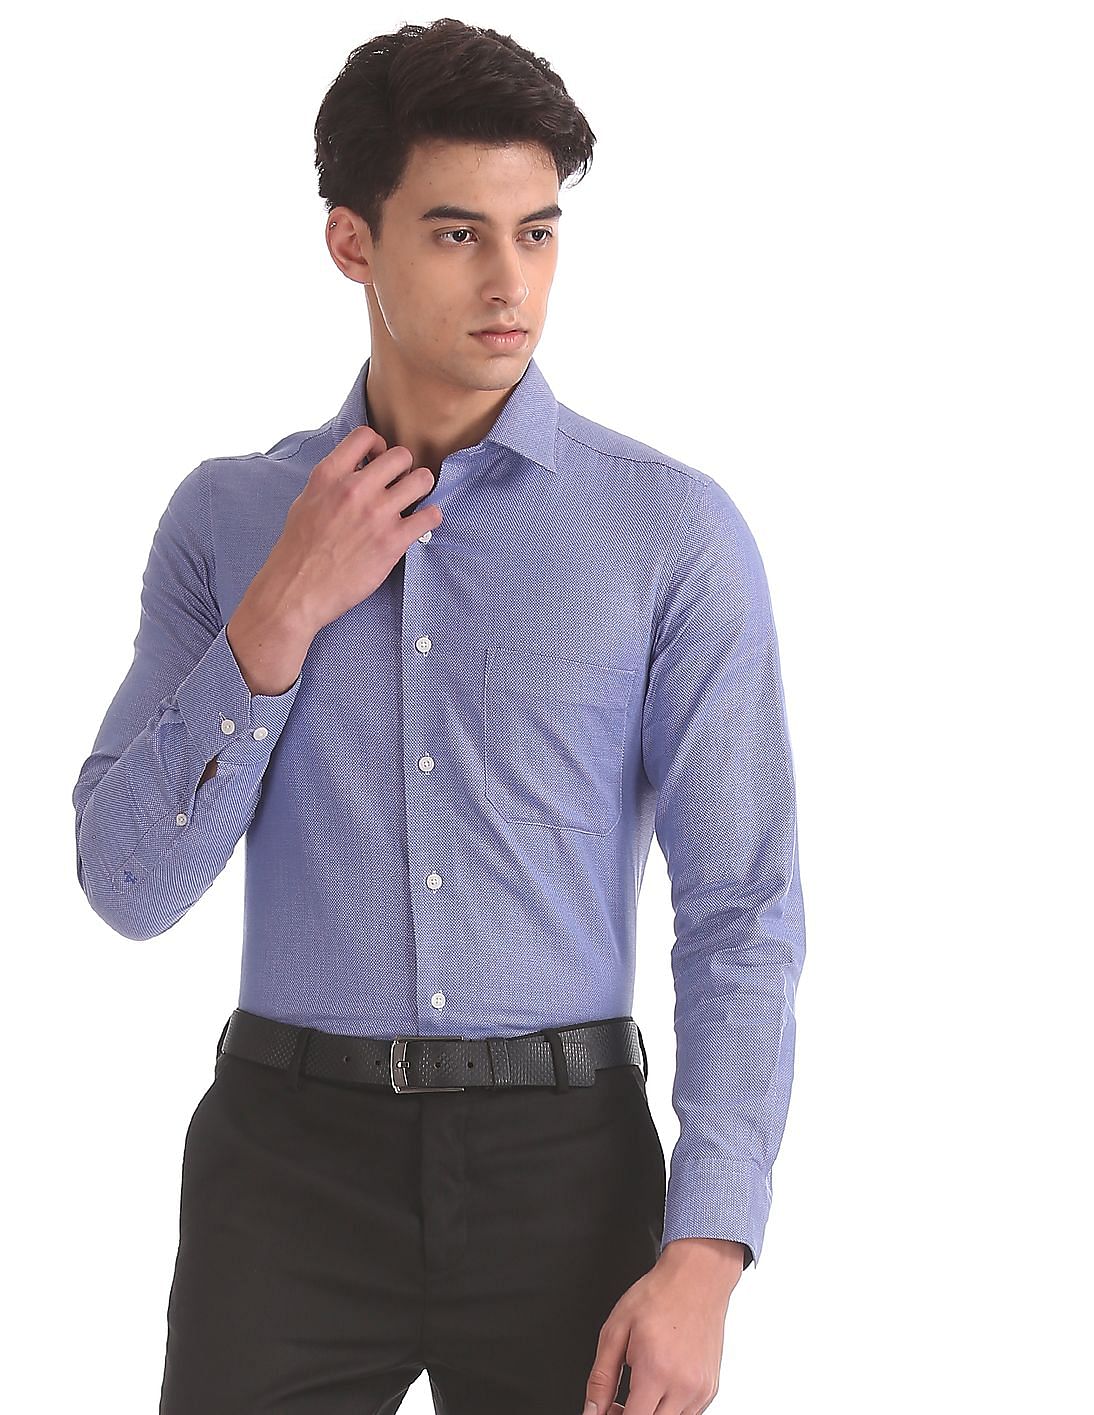 Buy Arrow Blue French Placket Patterned Shirt - NNNOW.com